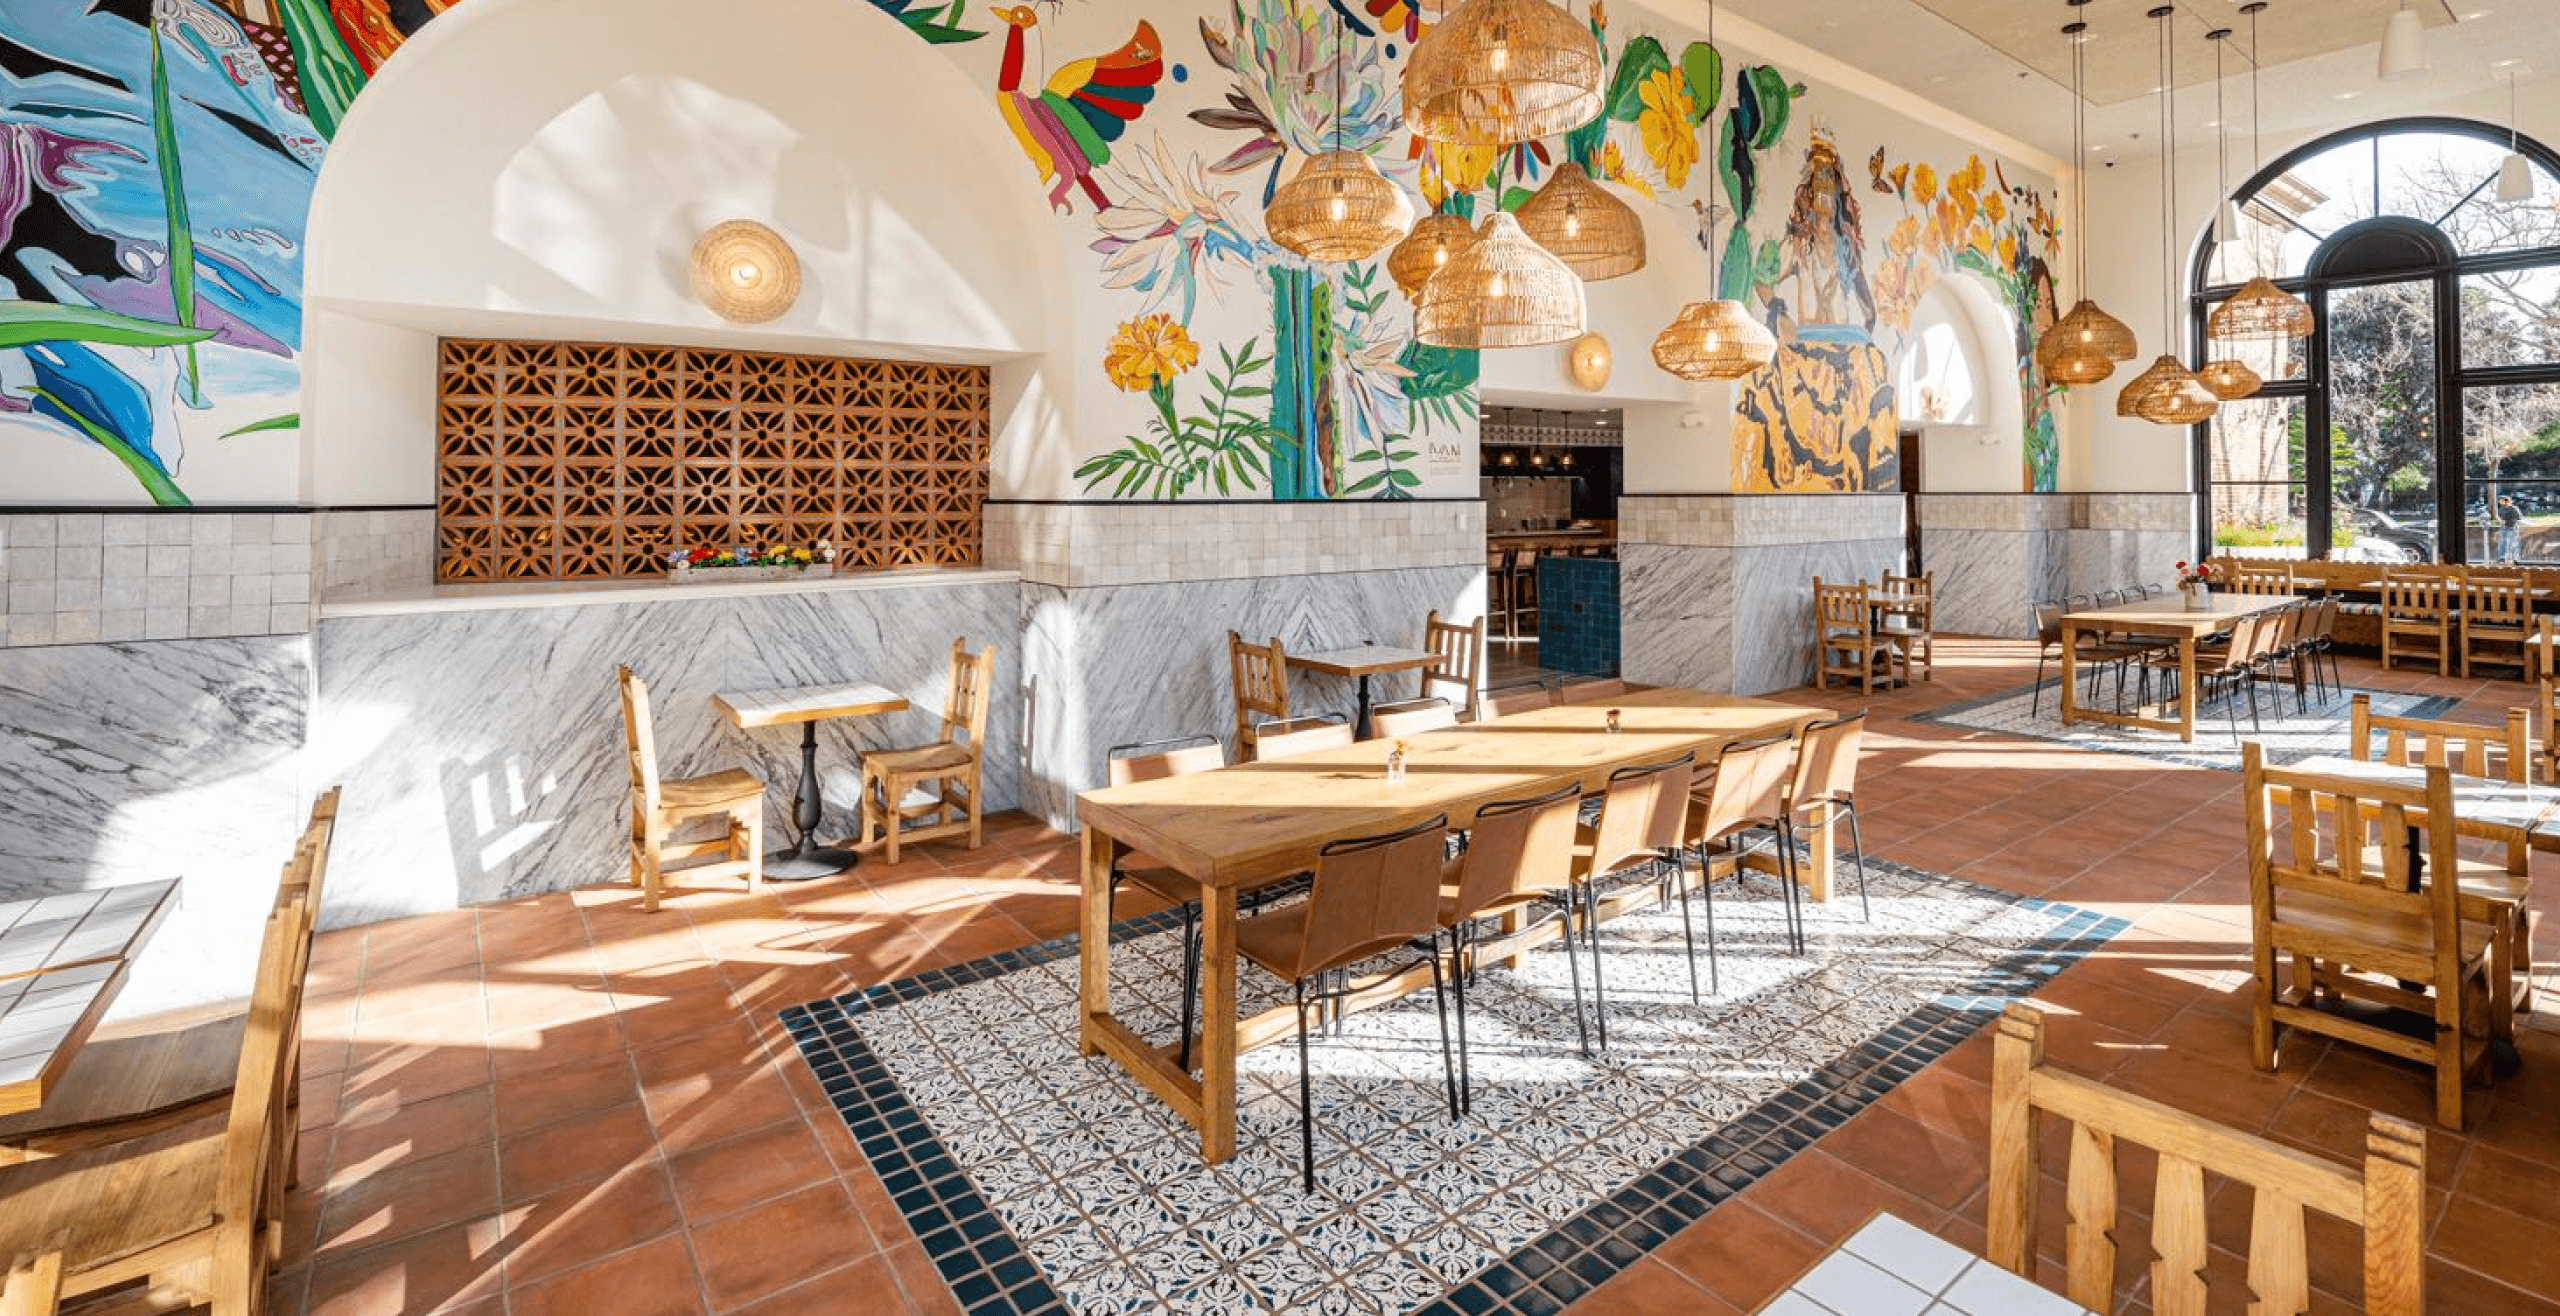 An image of a sunny dining room with wood and tiled tables and a large colorful mural on the wall.